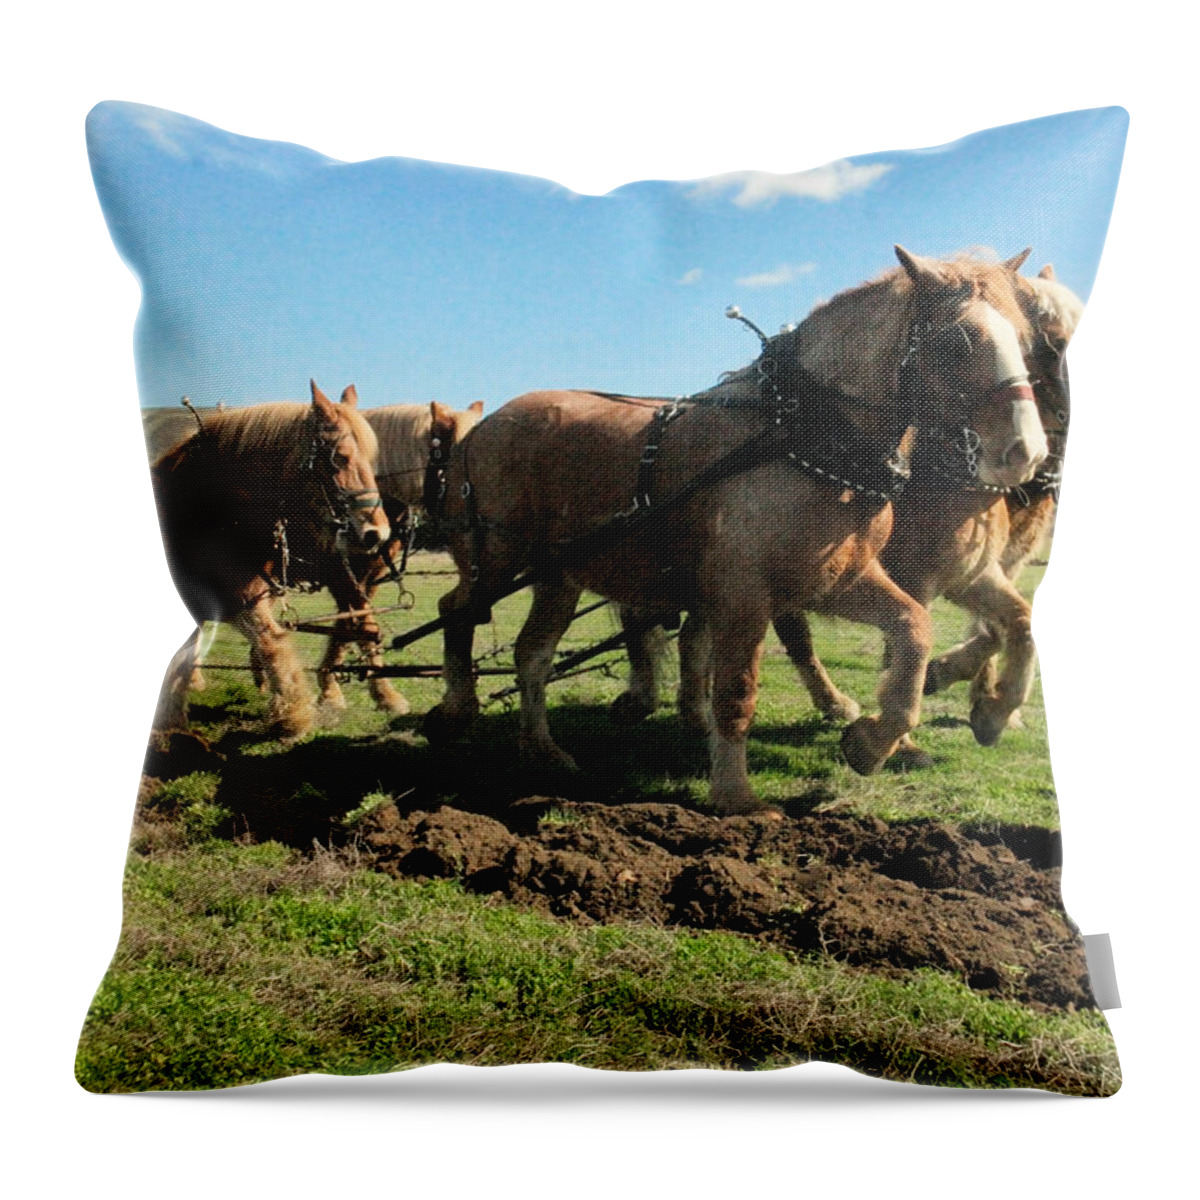 Plowing Throw Pillow featuring the photograph Horse power by Jeff Swan